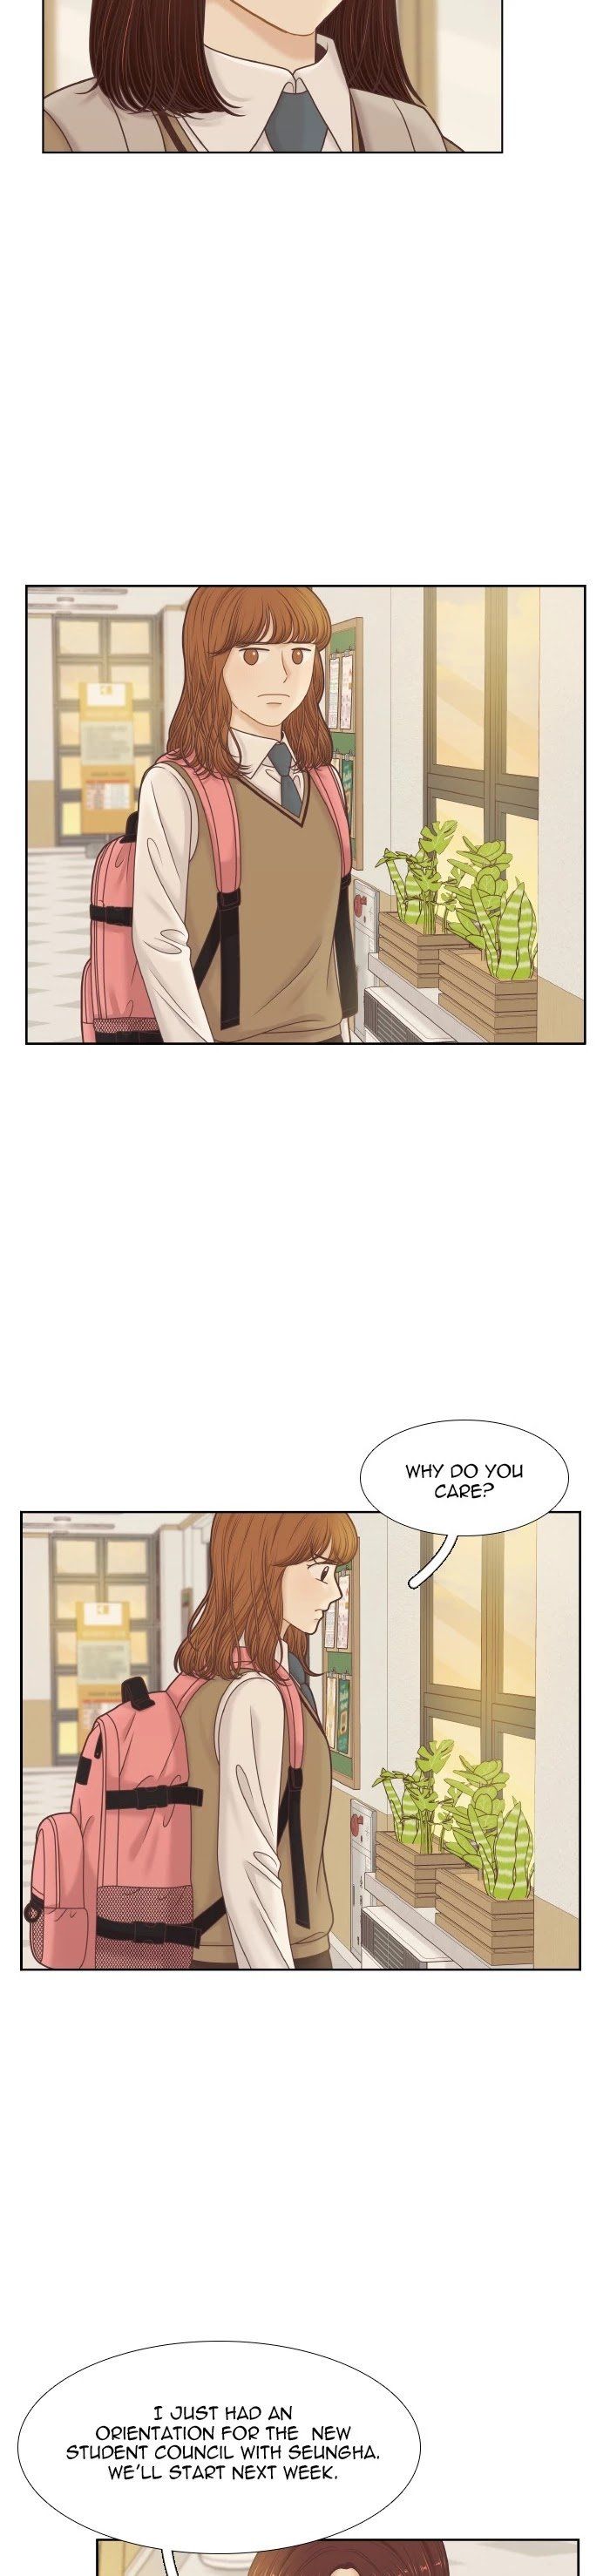 Girl’s World ( World of Girl ) Chapter 305 - Page 3